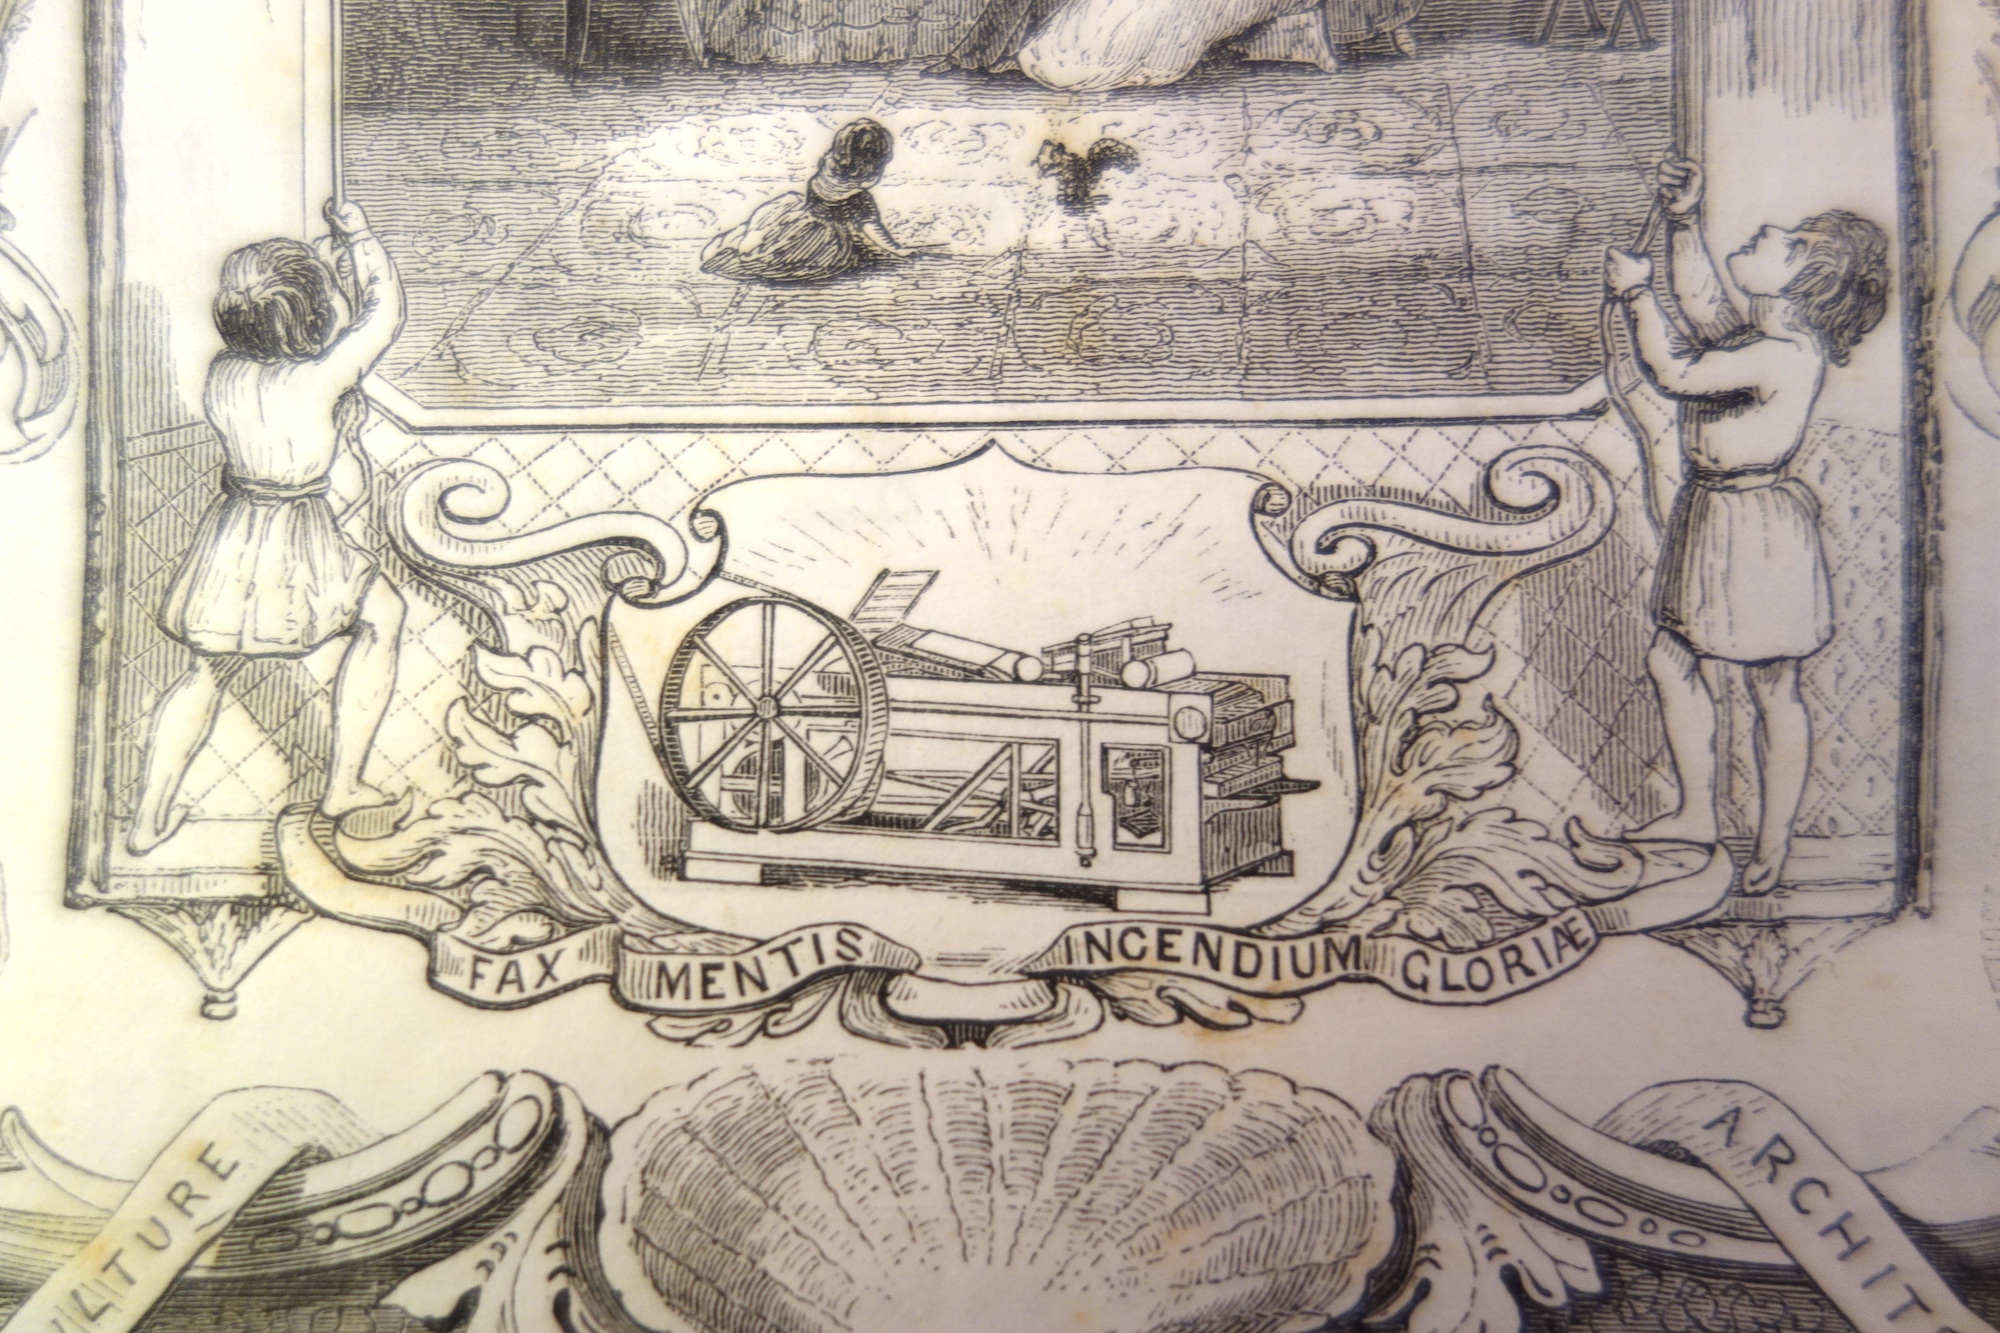 Enlargement of the foot of the Harper design to show the Adams printing machine.